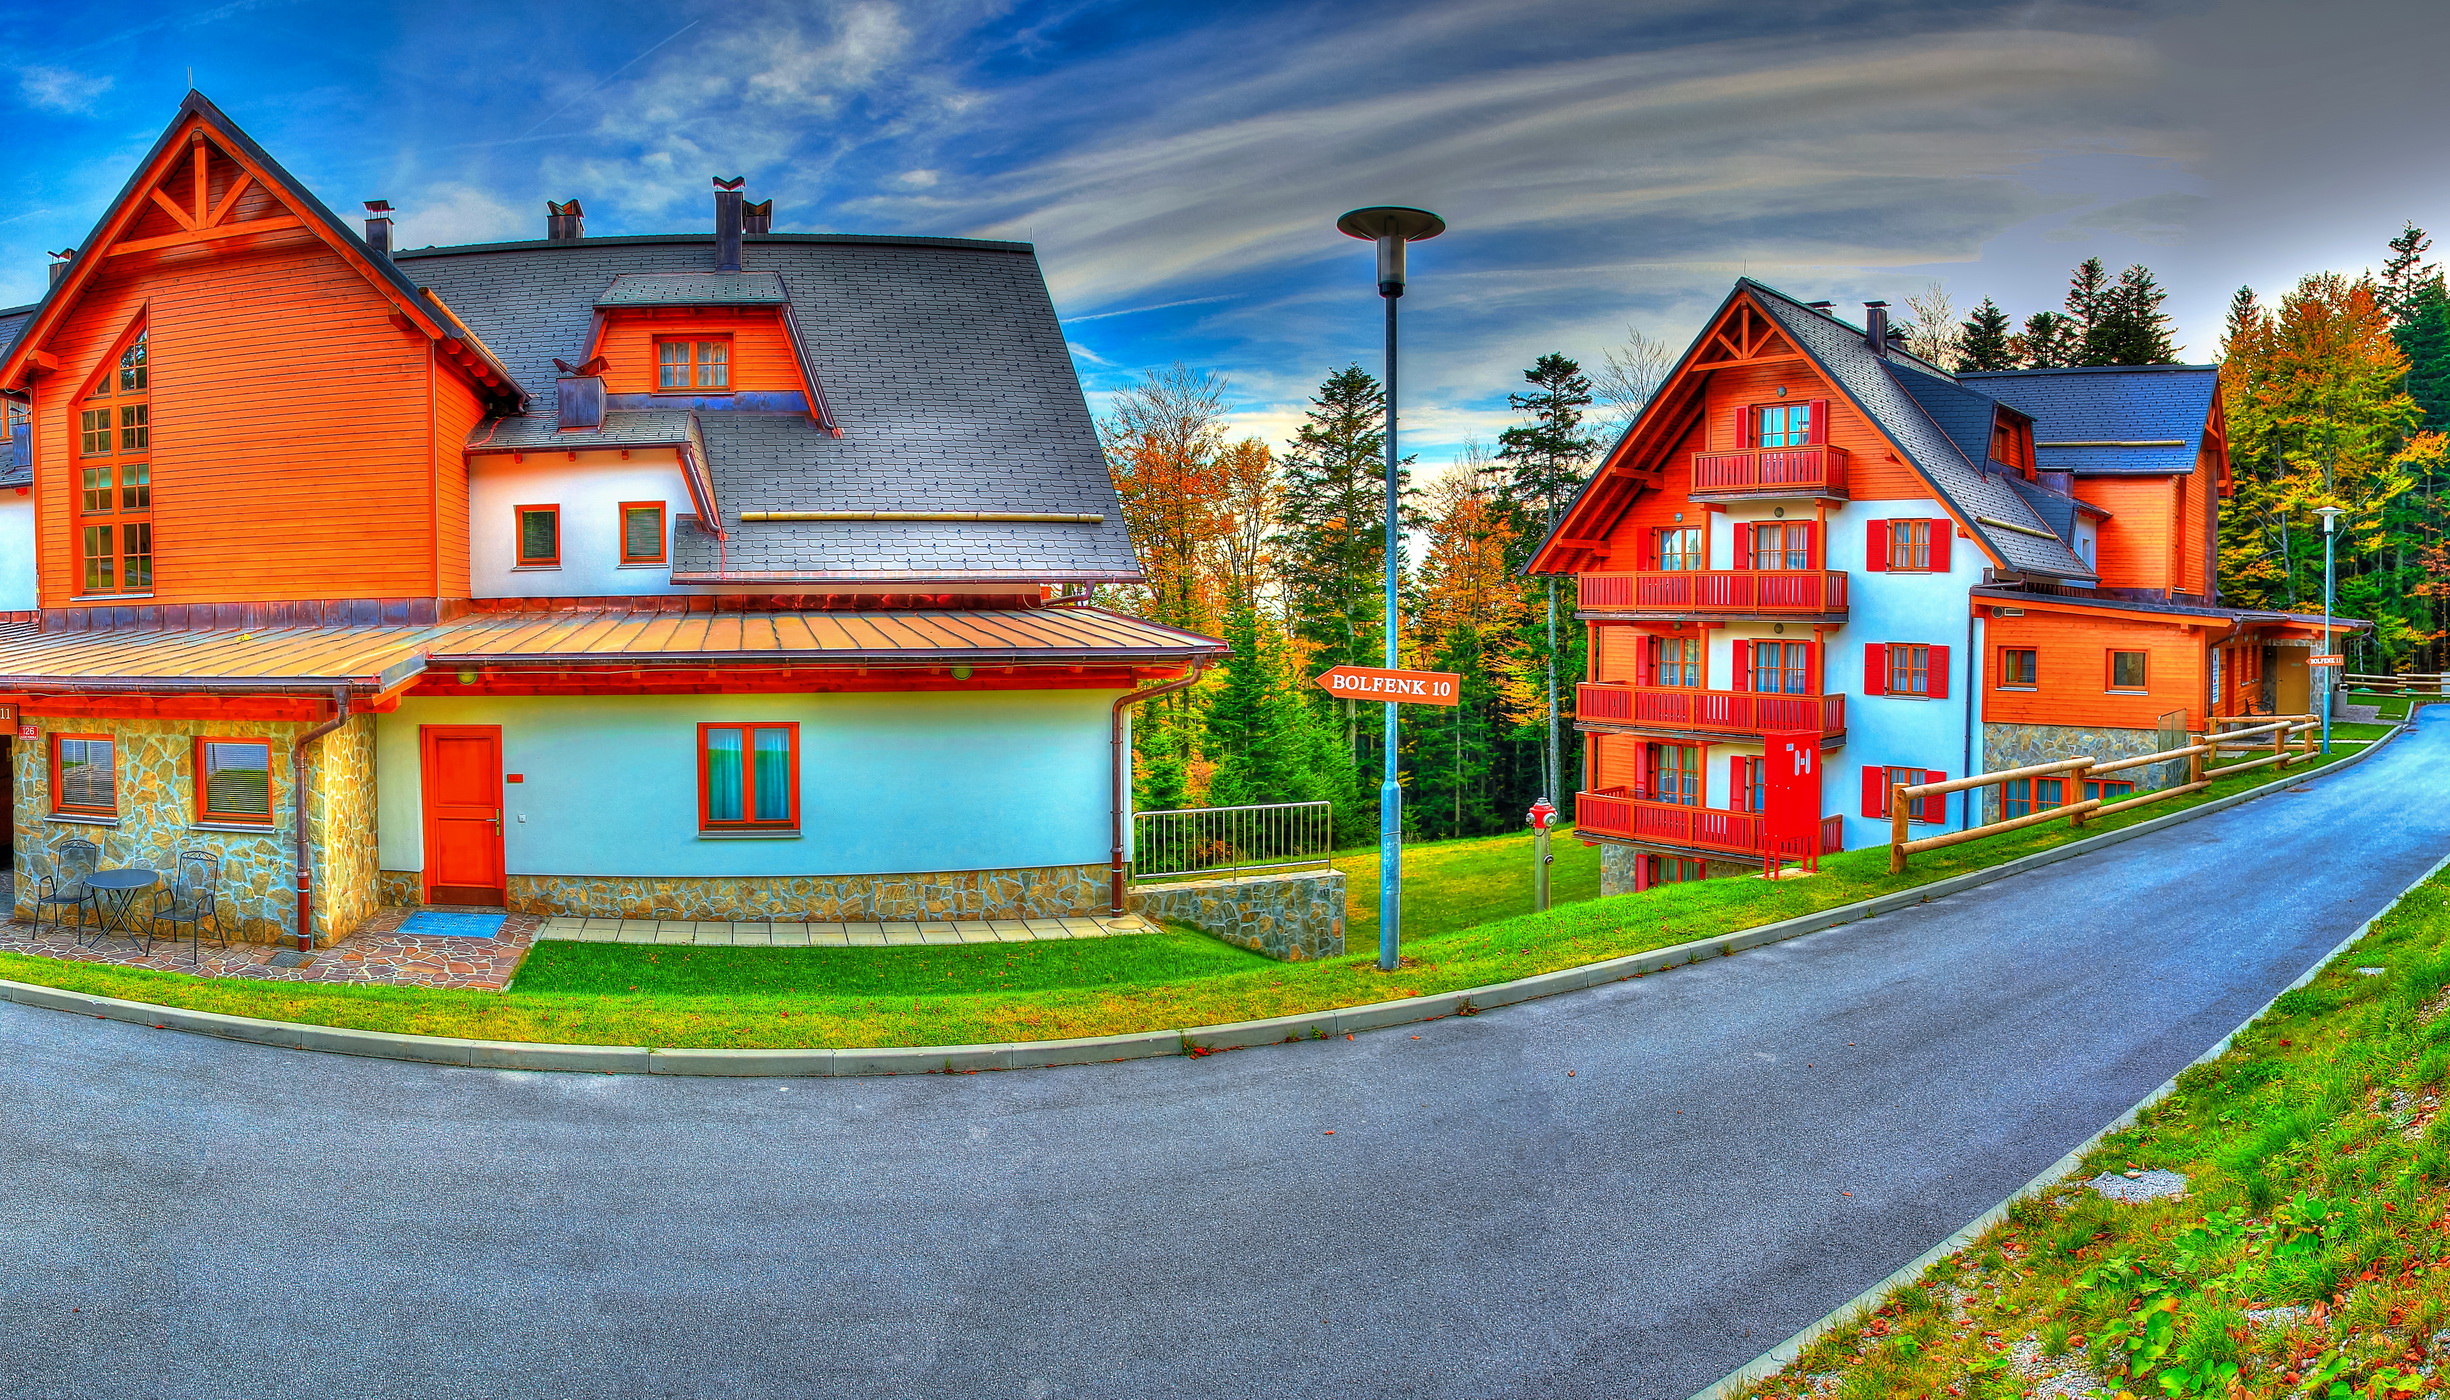 photography, hdr, blue, colorful, house, orange (color), slovenia, street